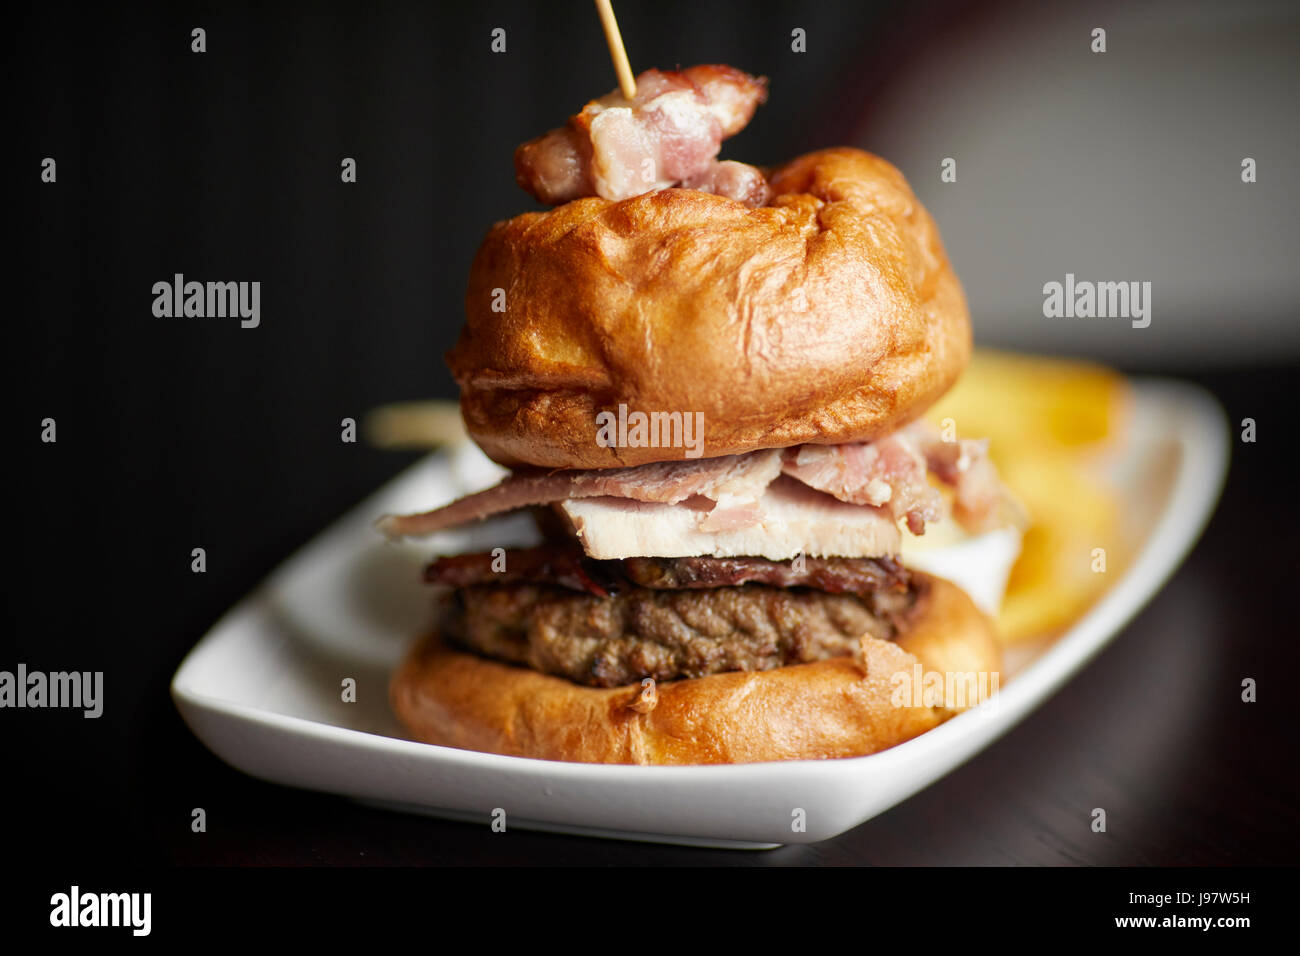 Traditional pub food, Burger and chips. Stock Photo